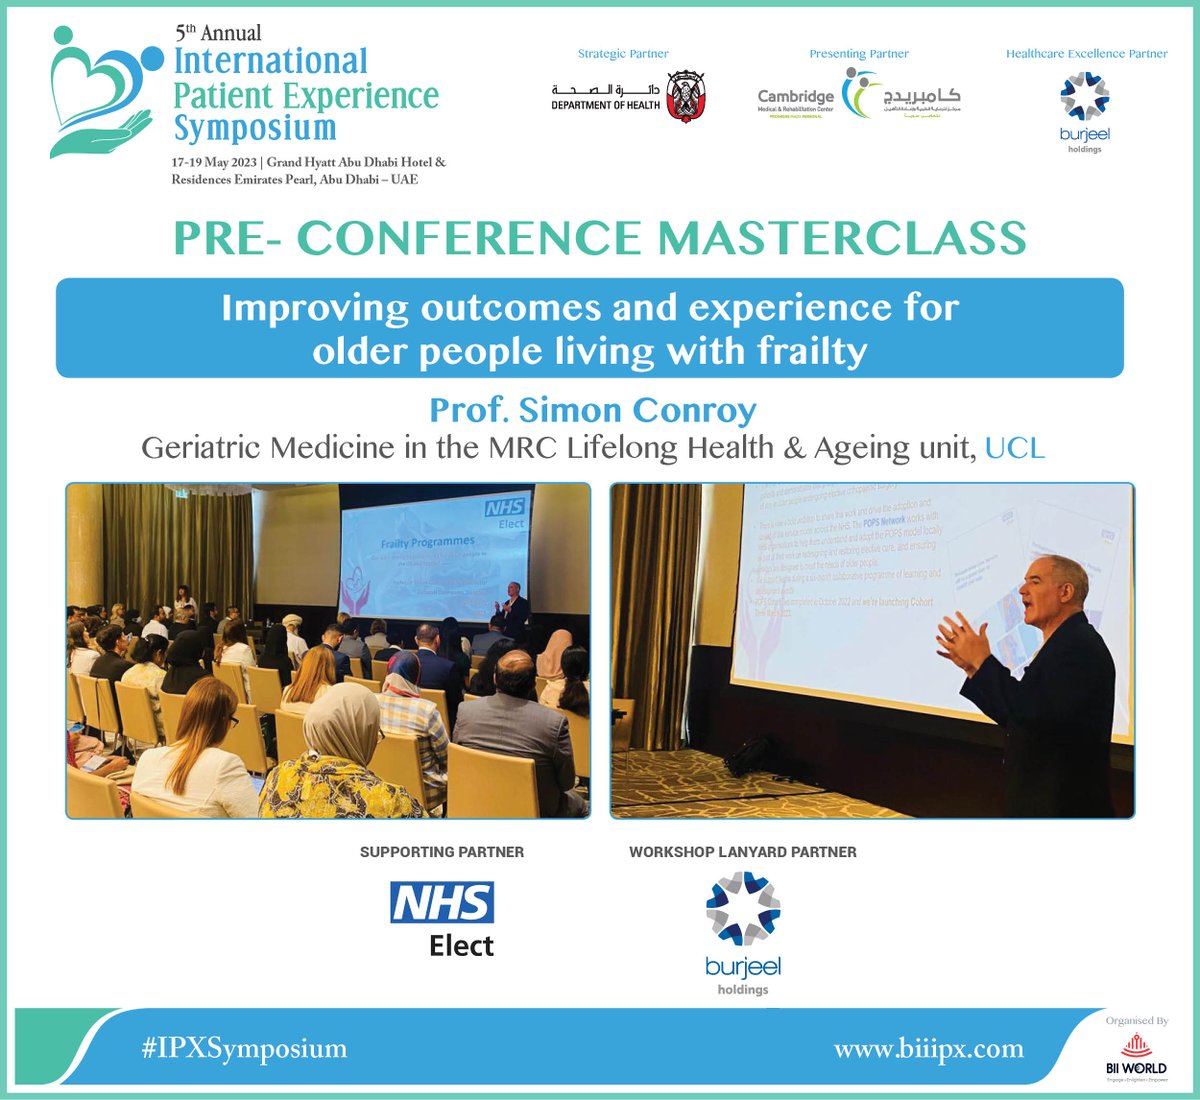 5th Annual International #patientexperience Symposium witnessed Prof. Simon Conroy  'Improving outcomes and experience for older people living with frailty' #IPXSymposium #patientcare #patientdata #patientengagement #patients #innovation #healthcaretransformation #virtualhealth